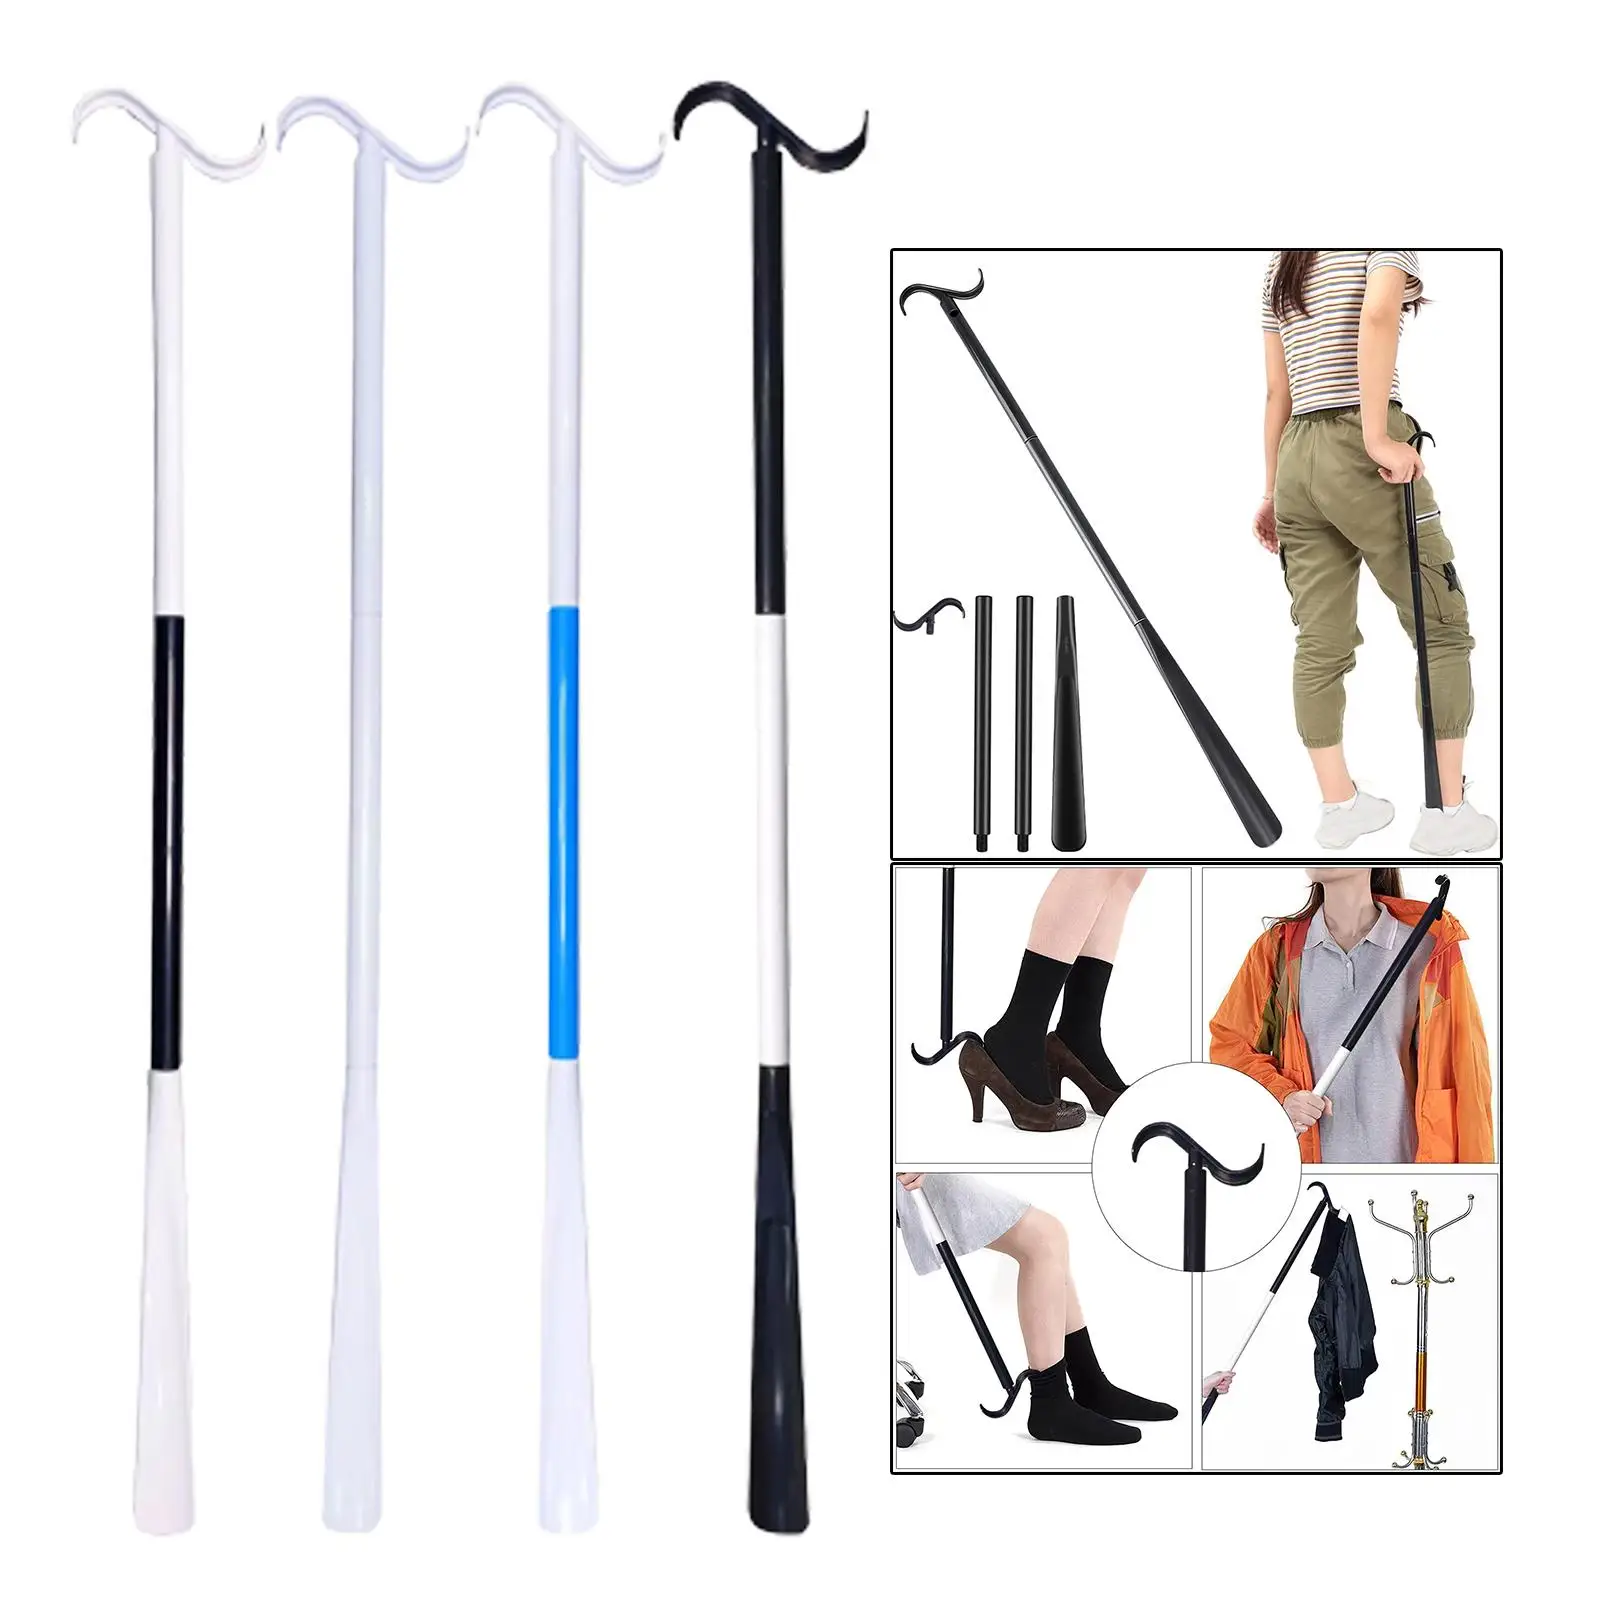 Dressing Stick Aid Adjustable Extended Shoehorn for Socks Shoes Back Problem Shoes Socks Dressing Aids with Shoehorn Assisted